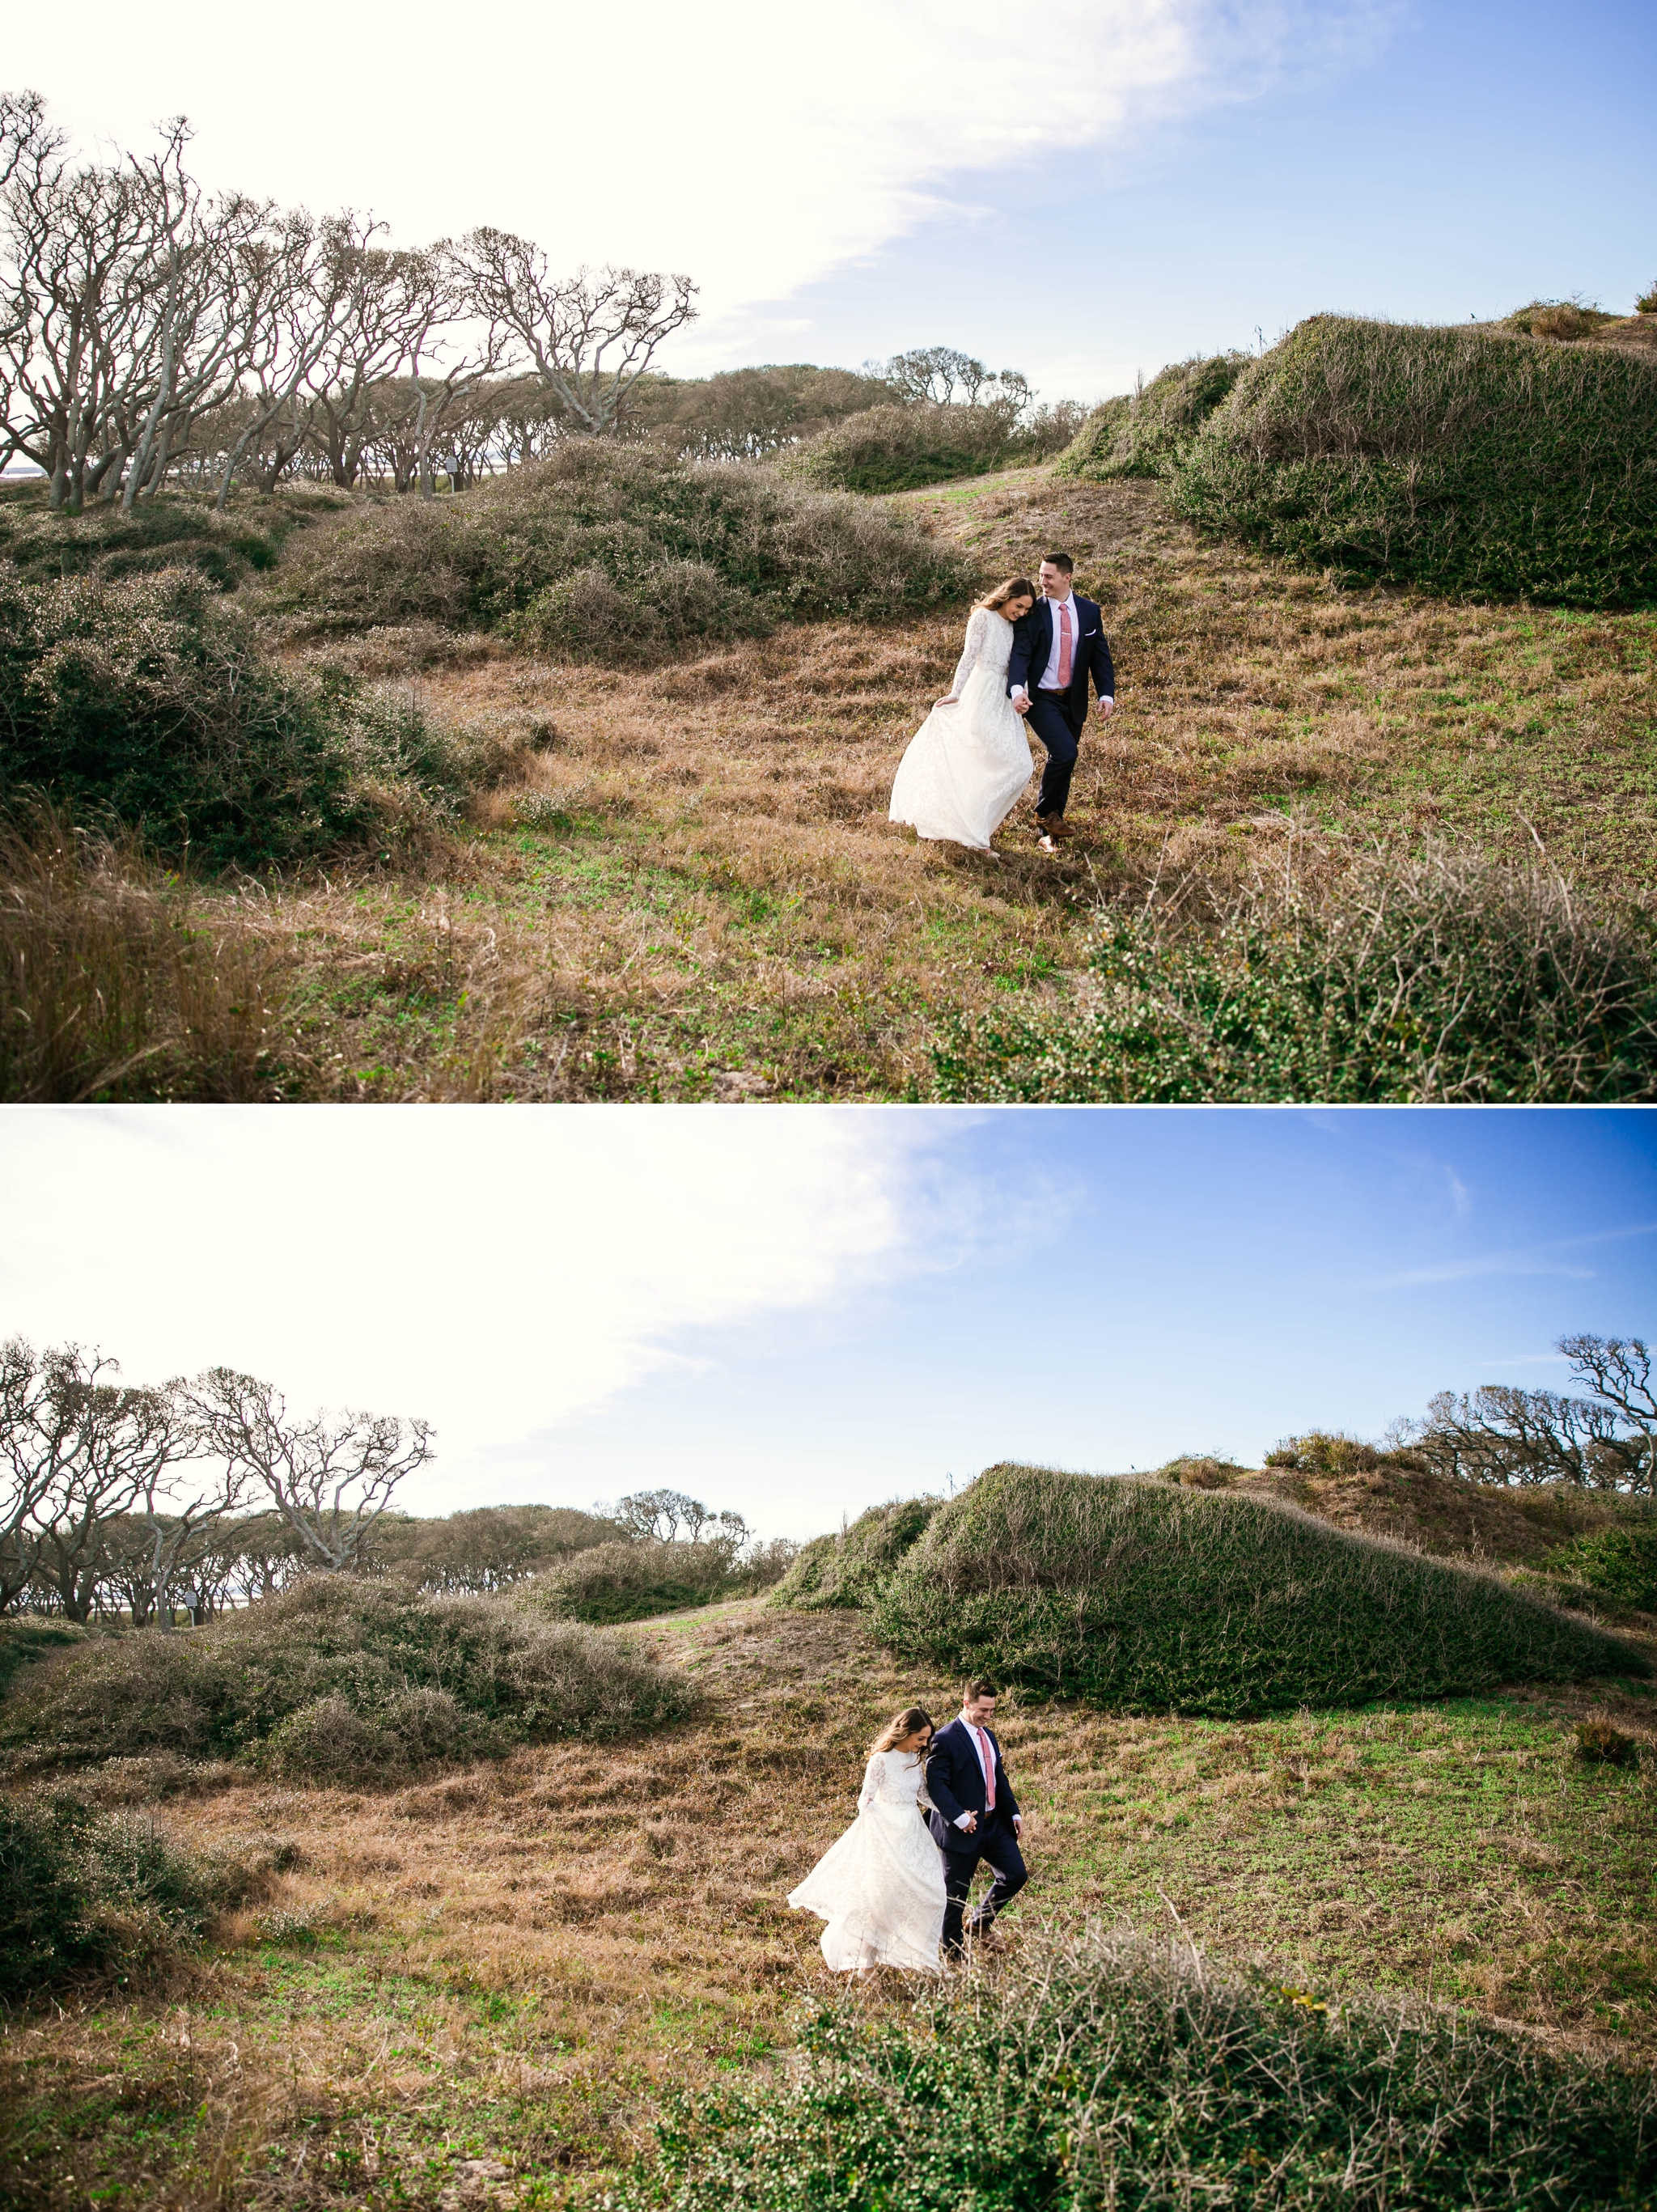 Bride and Groom walking in Lush Green Hills - Beach Elopement Photography - wedding dress by asos with purple and pink flowers and navy suit - oahu hawaii wedding photographer